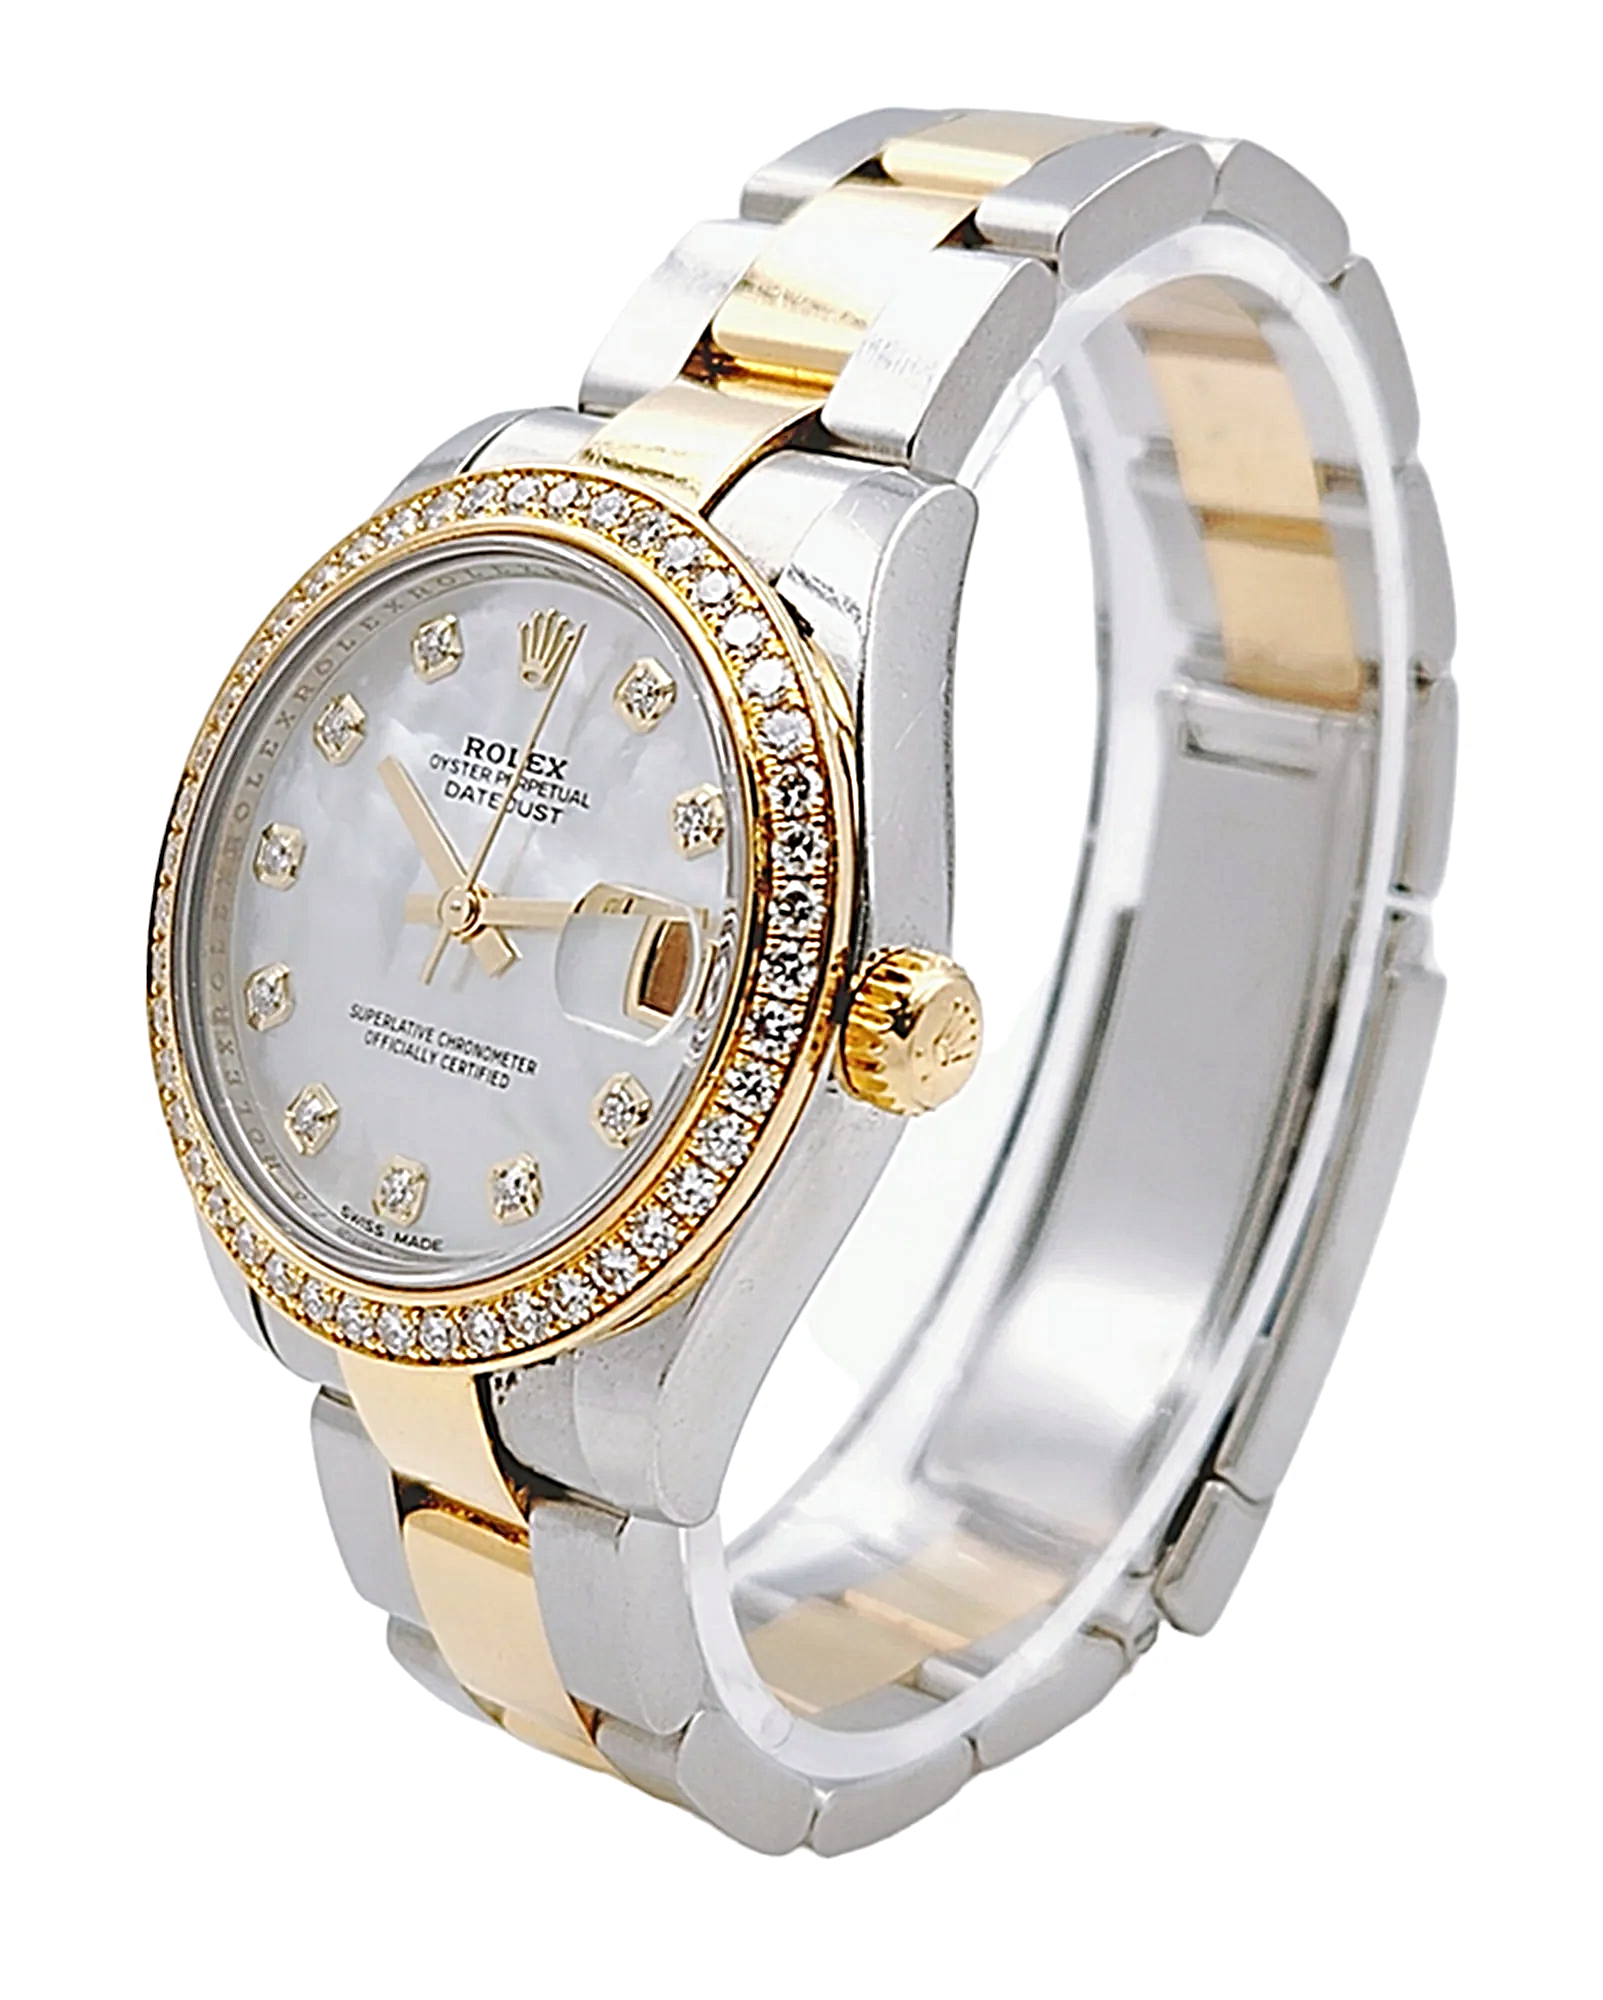 2018 Ladies Rolex DateJust 31mm Midsize Two Tone 18K Yellow Gold / Stainless Steel Wristwatch w/ Mother of Pearl Diamond Dial & Diamond Bezel. (Pre-Owned 178383)